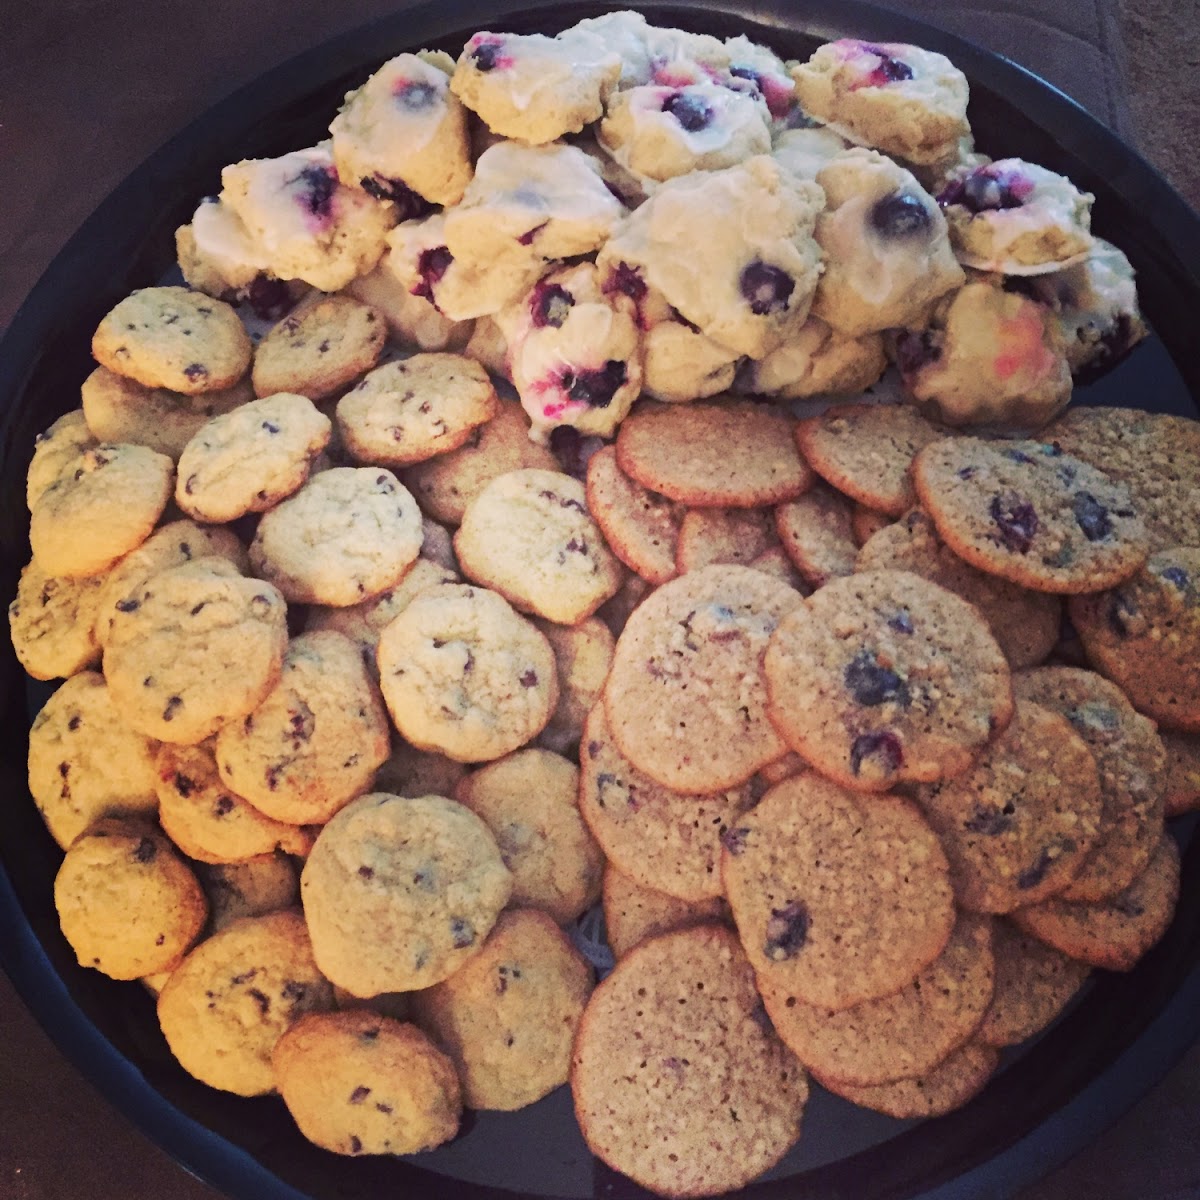 Gluten free cookies. Platters made to order.